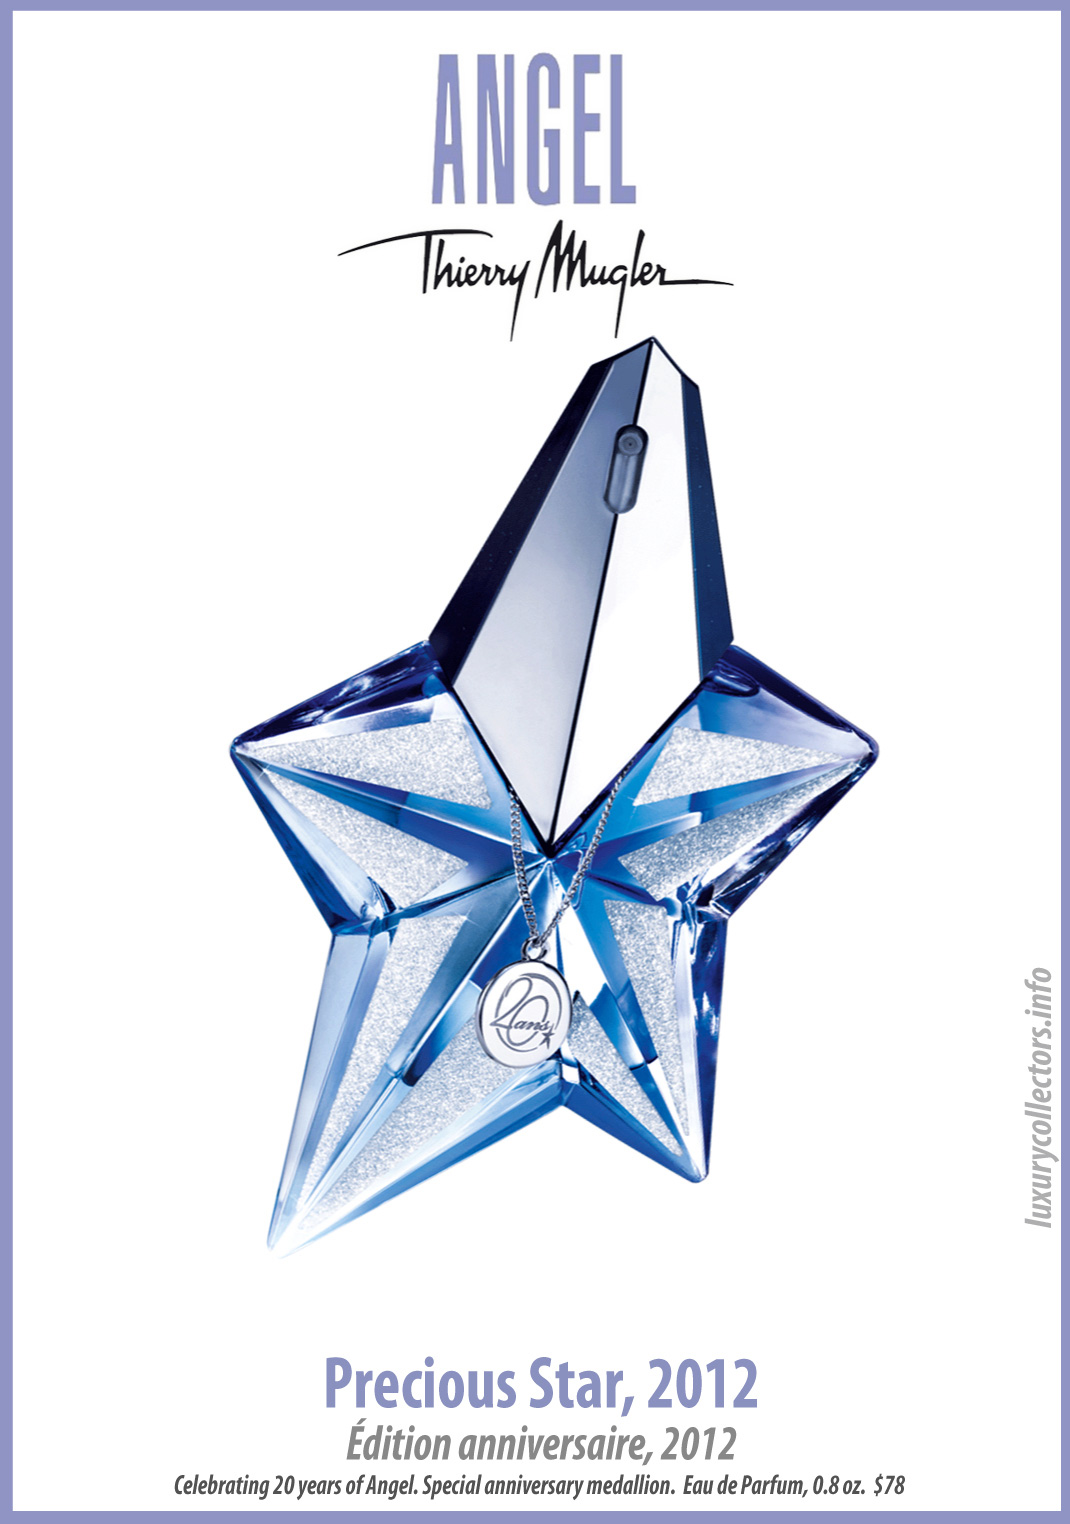 Thierry Mugler Angel Perfume Collector's Limited Edition Bottle 2012 Presious Star